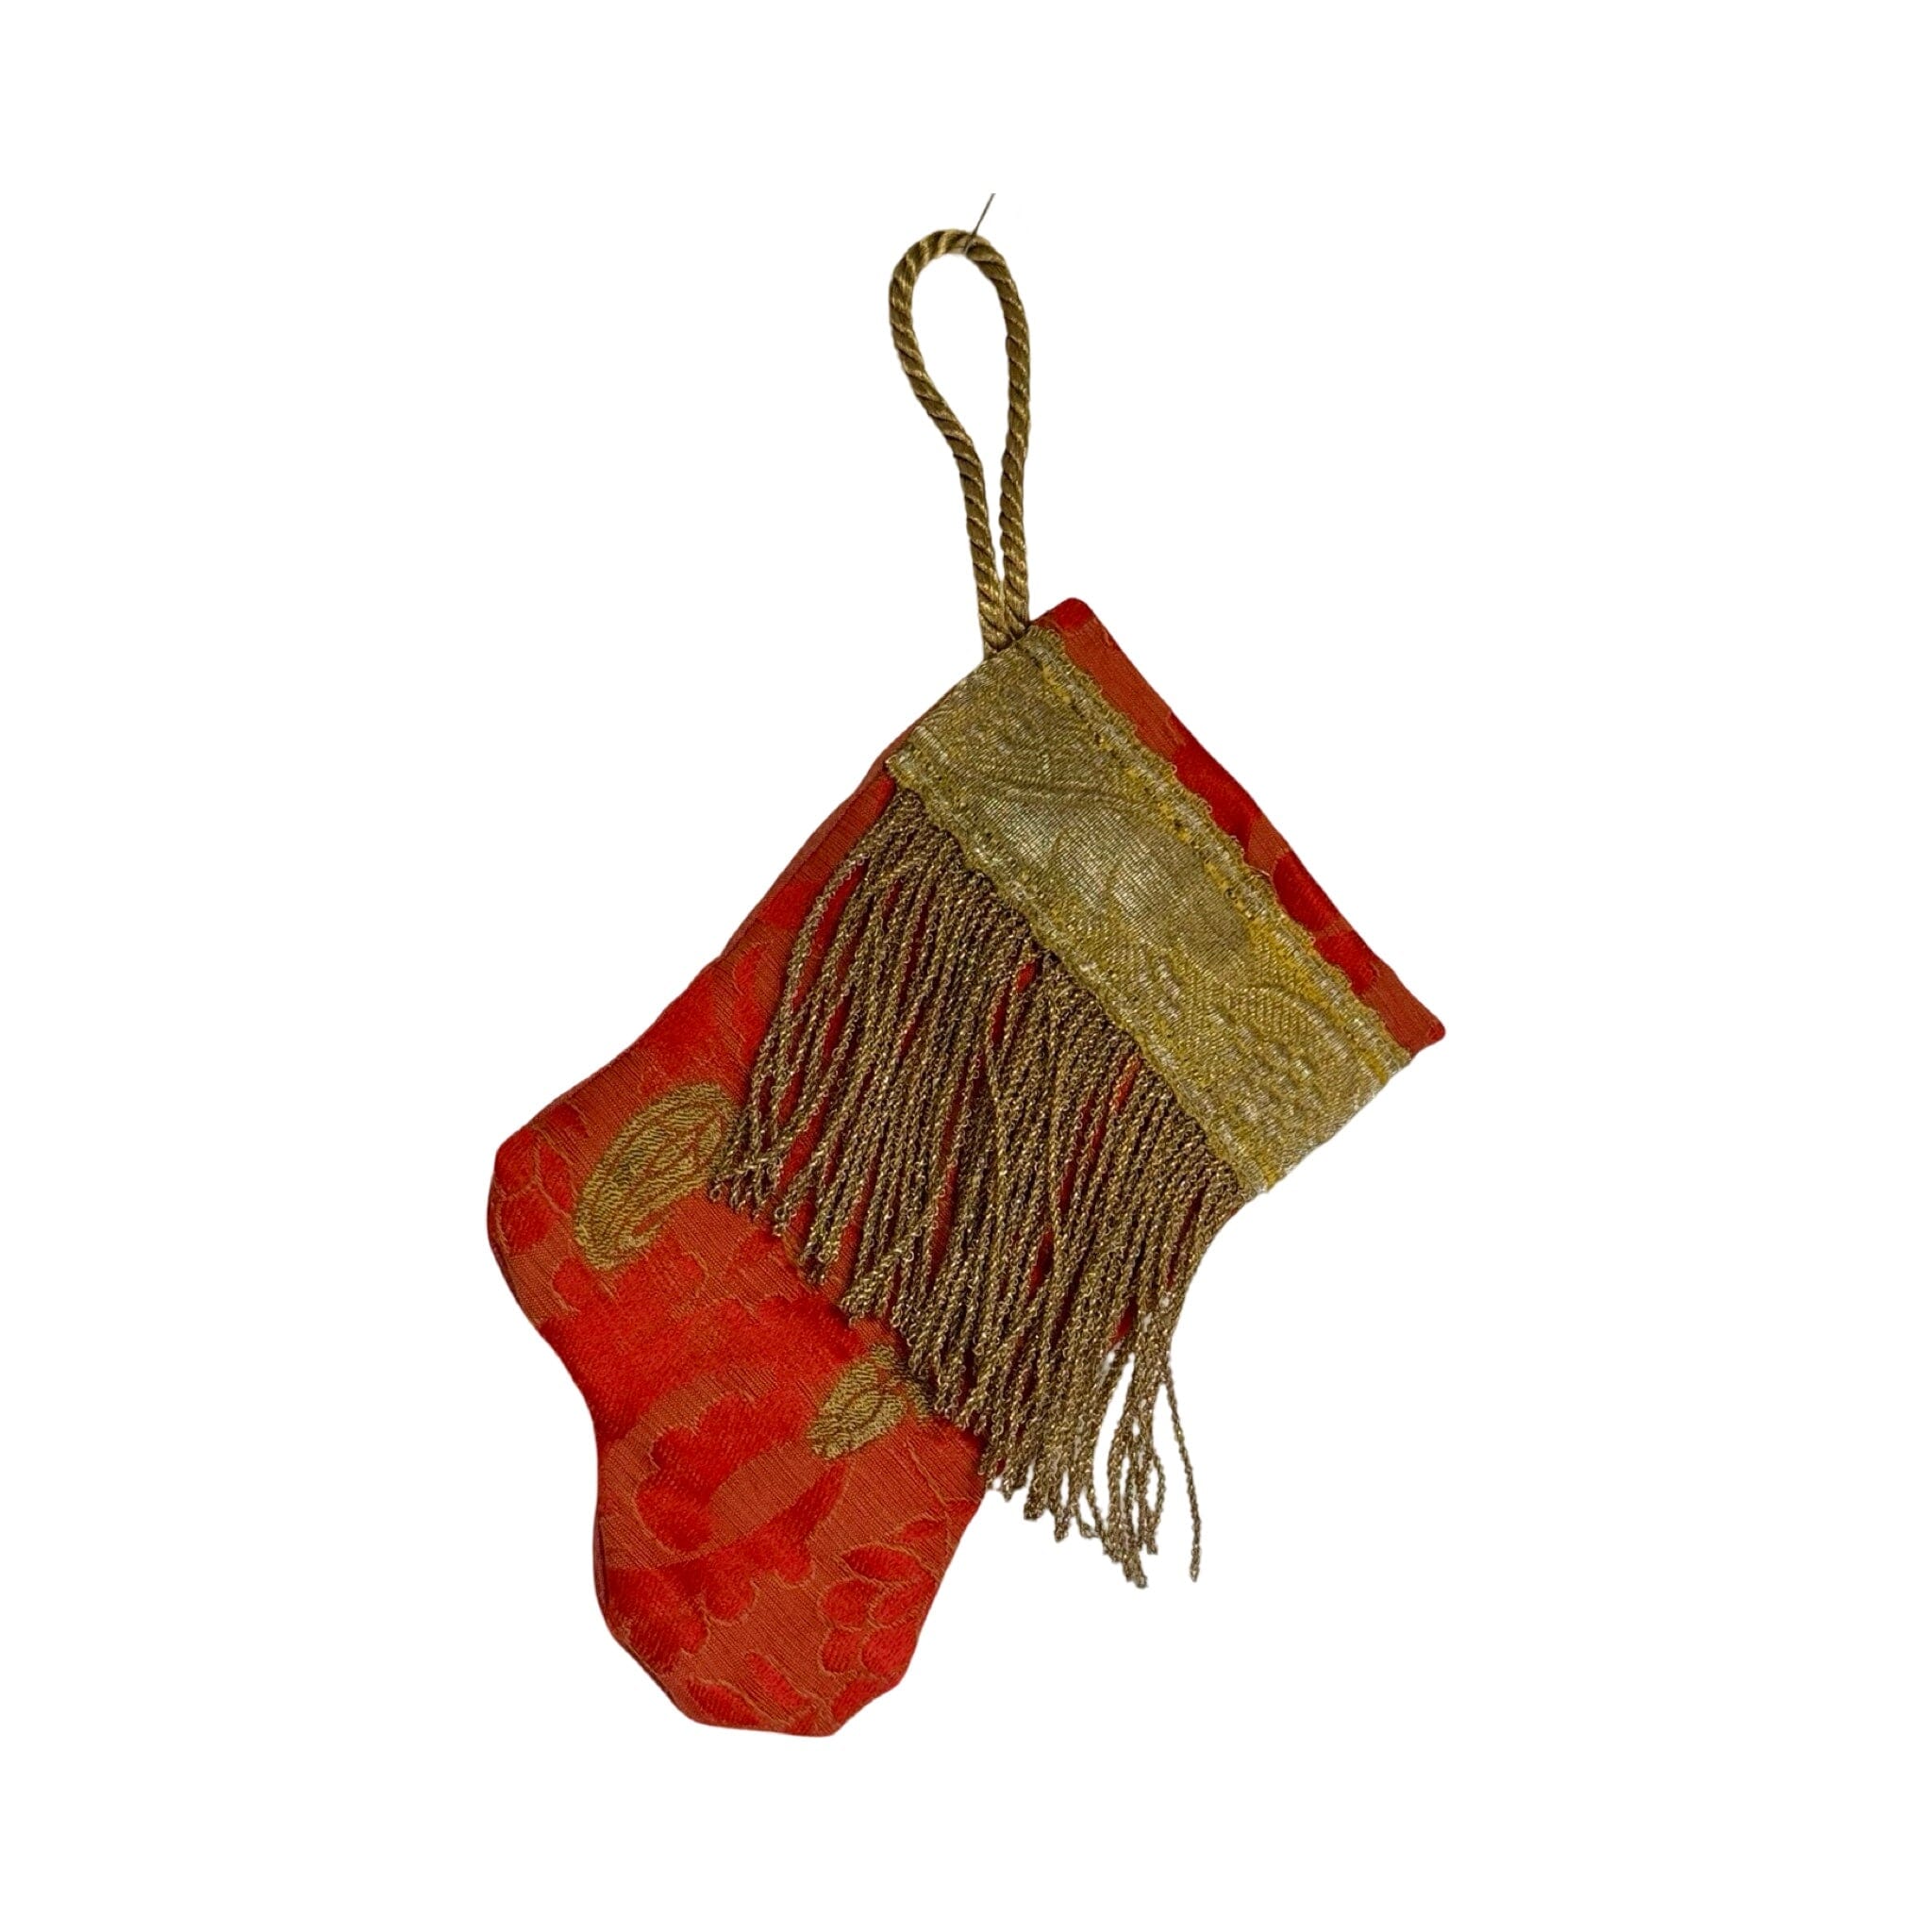 Handmade Mini Stocking Made From Vintage Fabric and Trims- Red and Gold Ornament B. Viz Design L 